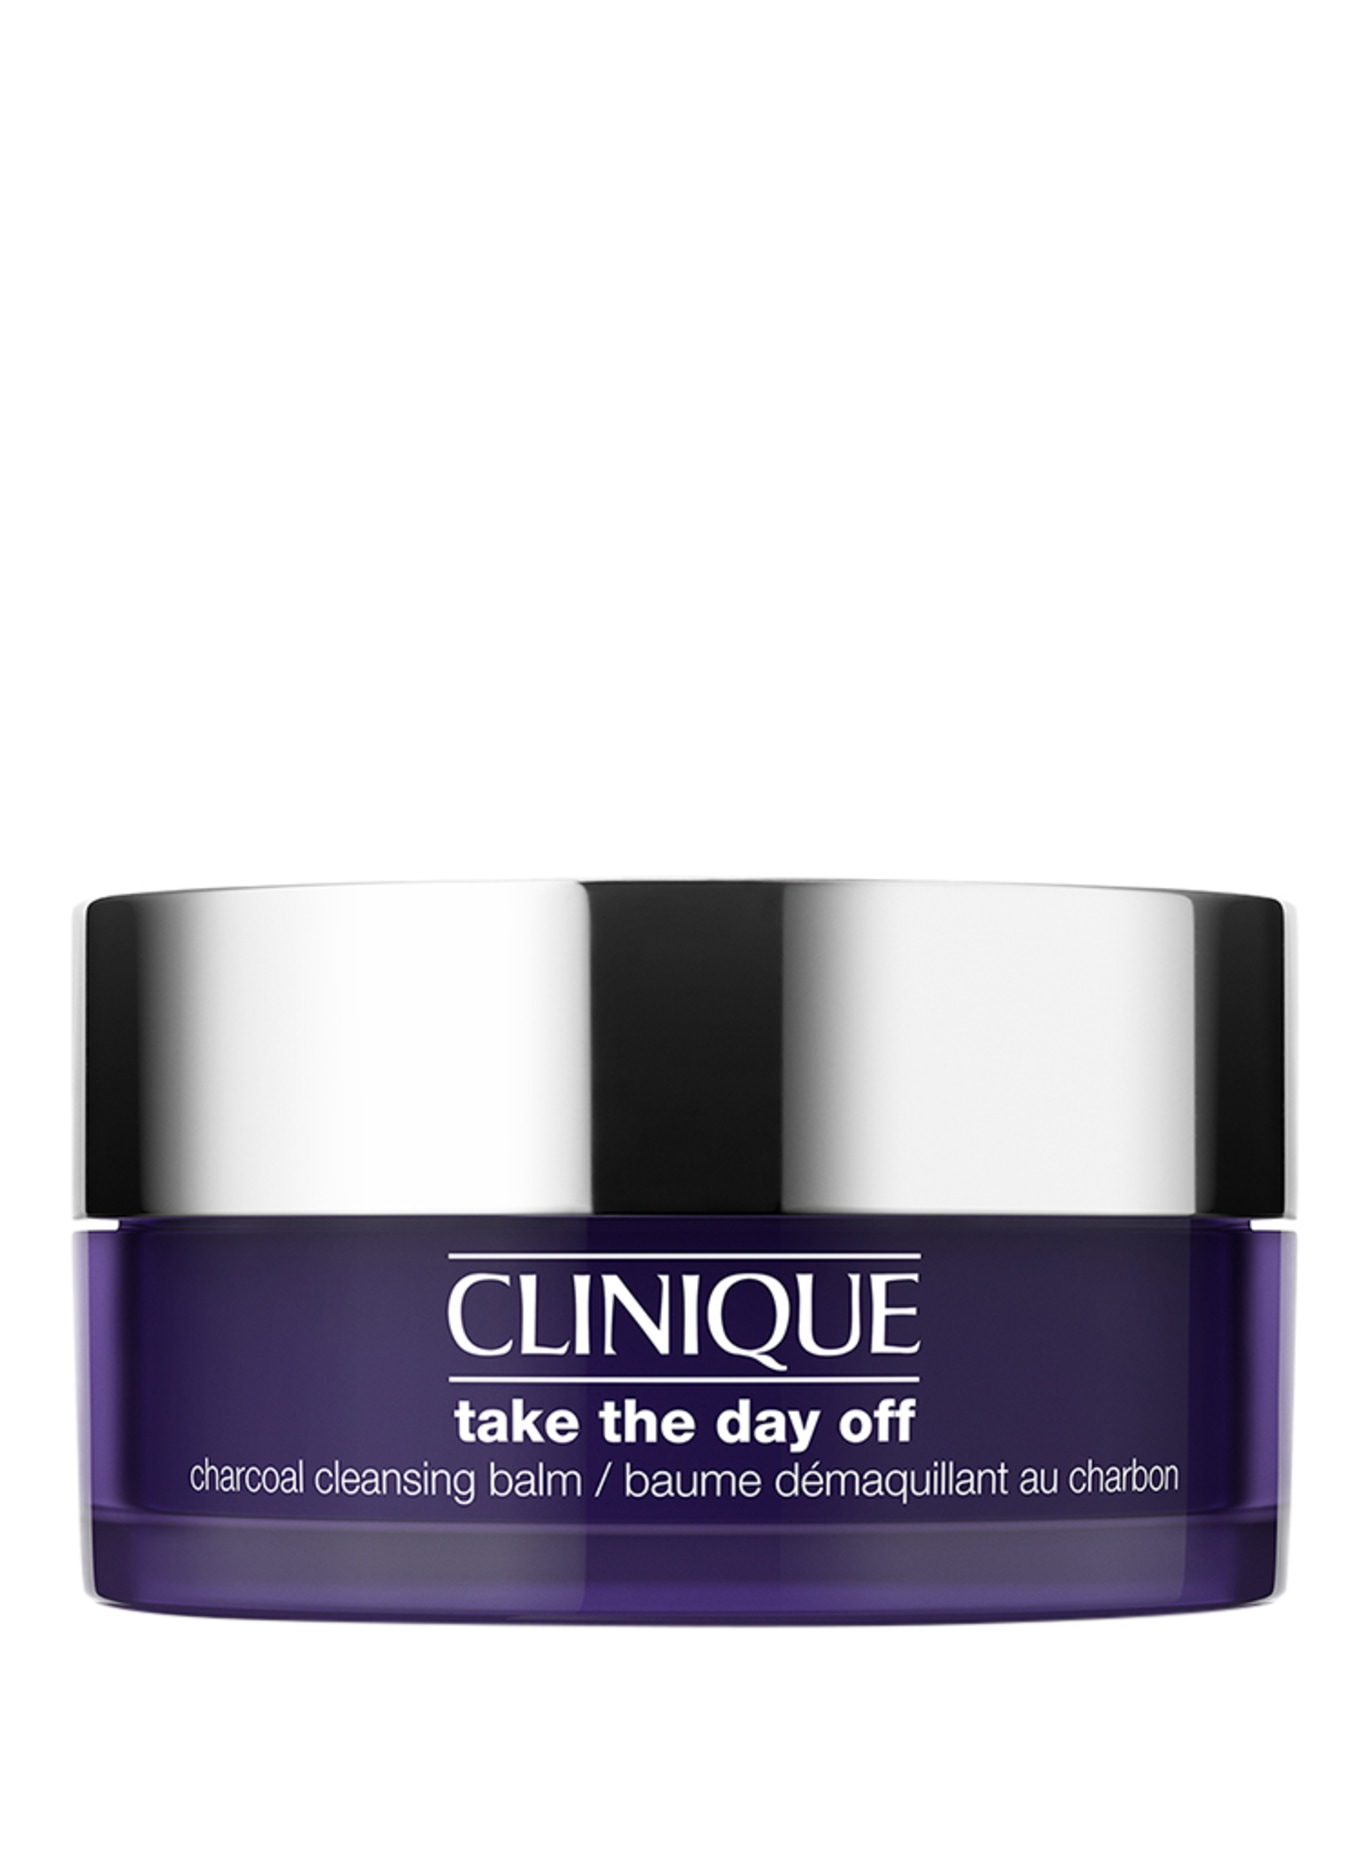 CLINIQUE TAKE THE DAY OFF CHARCOAL CLEANSING BALM (Obrázek 1)